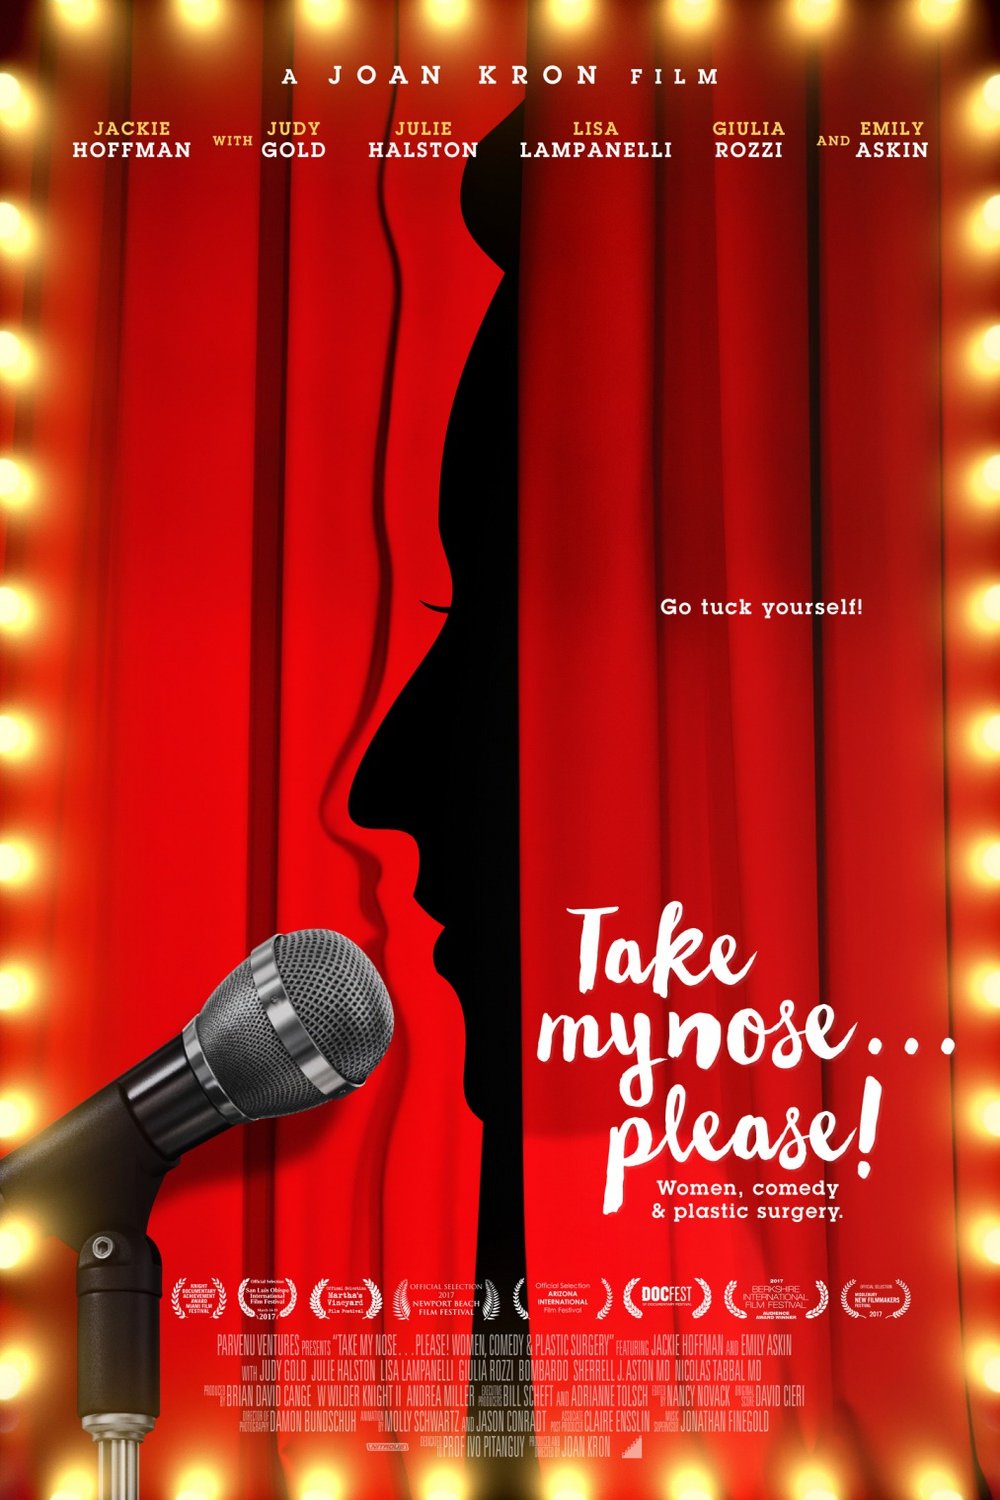 Poster of the movie Take My Nose... Please